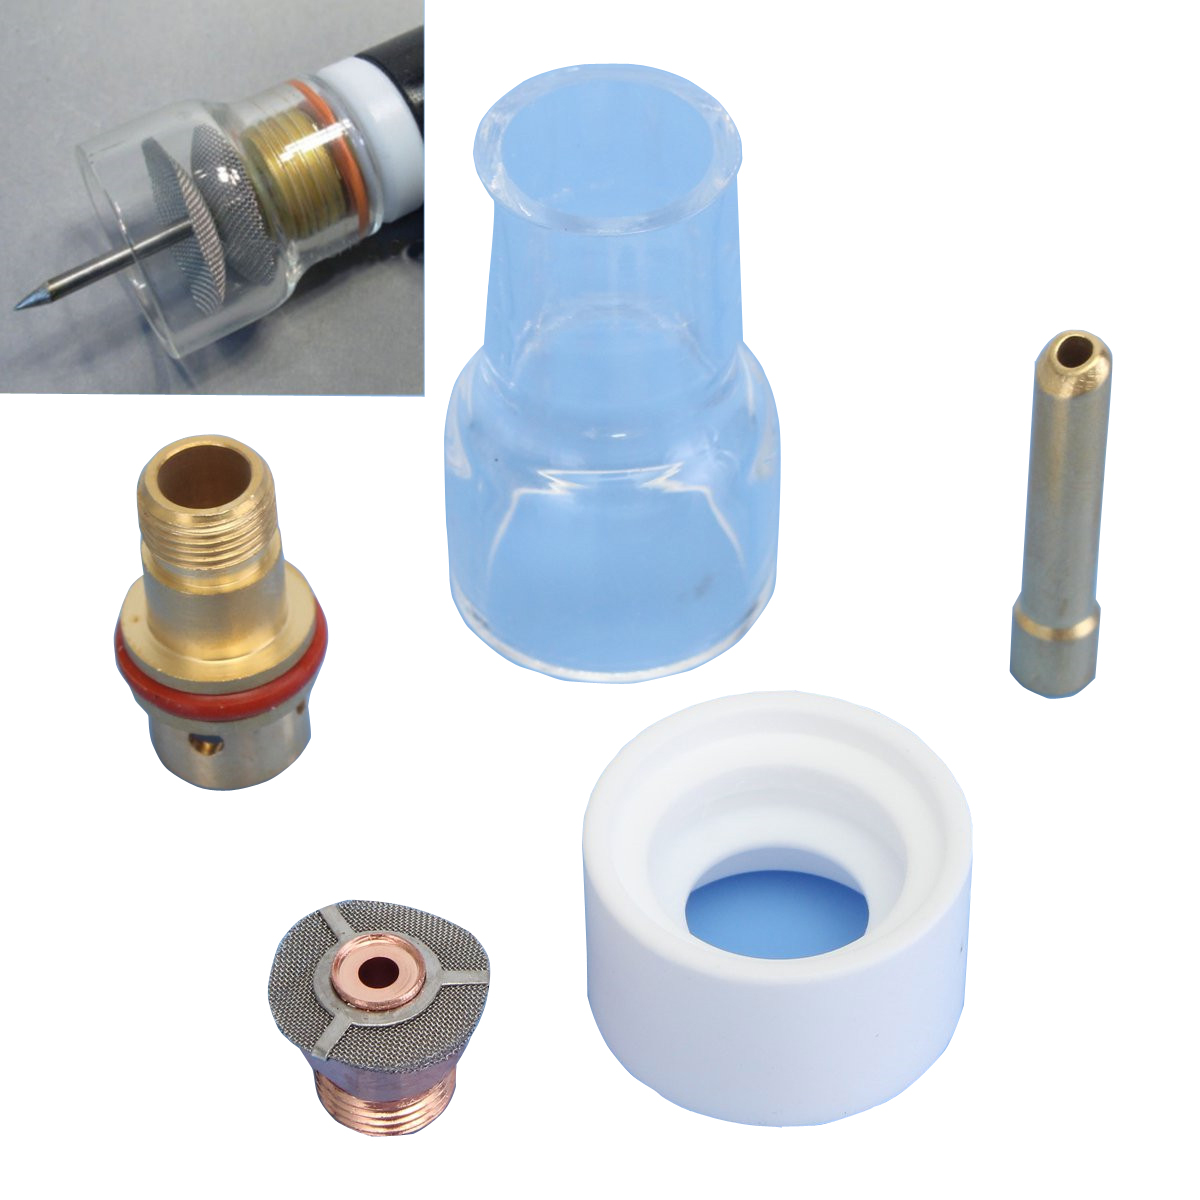 

5Pcs TIG Welding Torch Accessories Copper Mouth Glass Cover for WP-17/18/26 Series